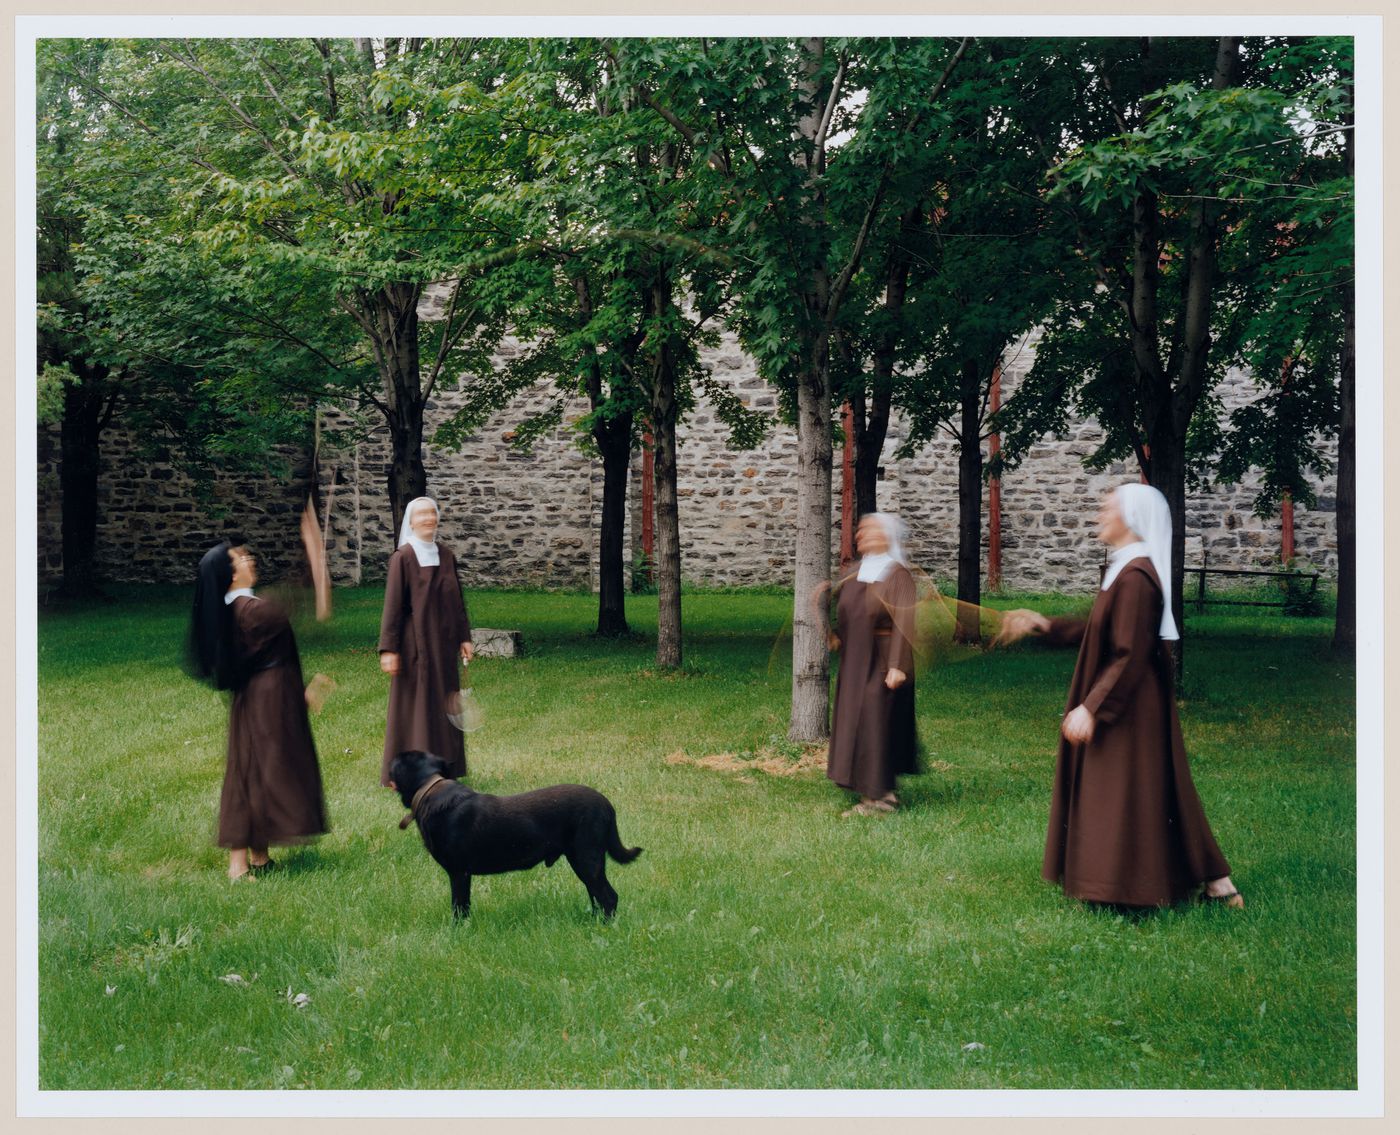 Group of Carmelite nuns playing badminton in their garden, from the Convent Series, Montreal, Canada